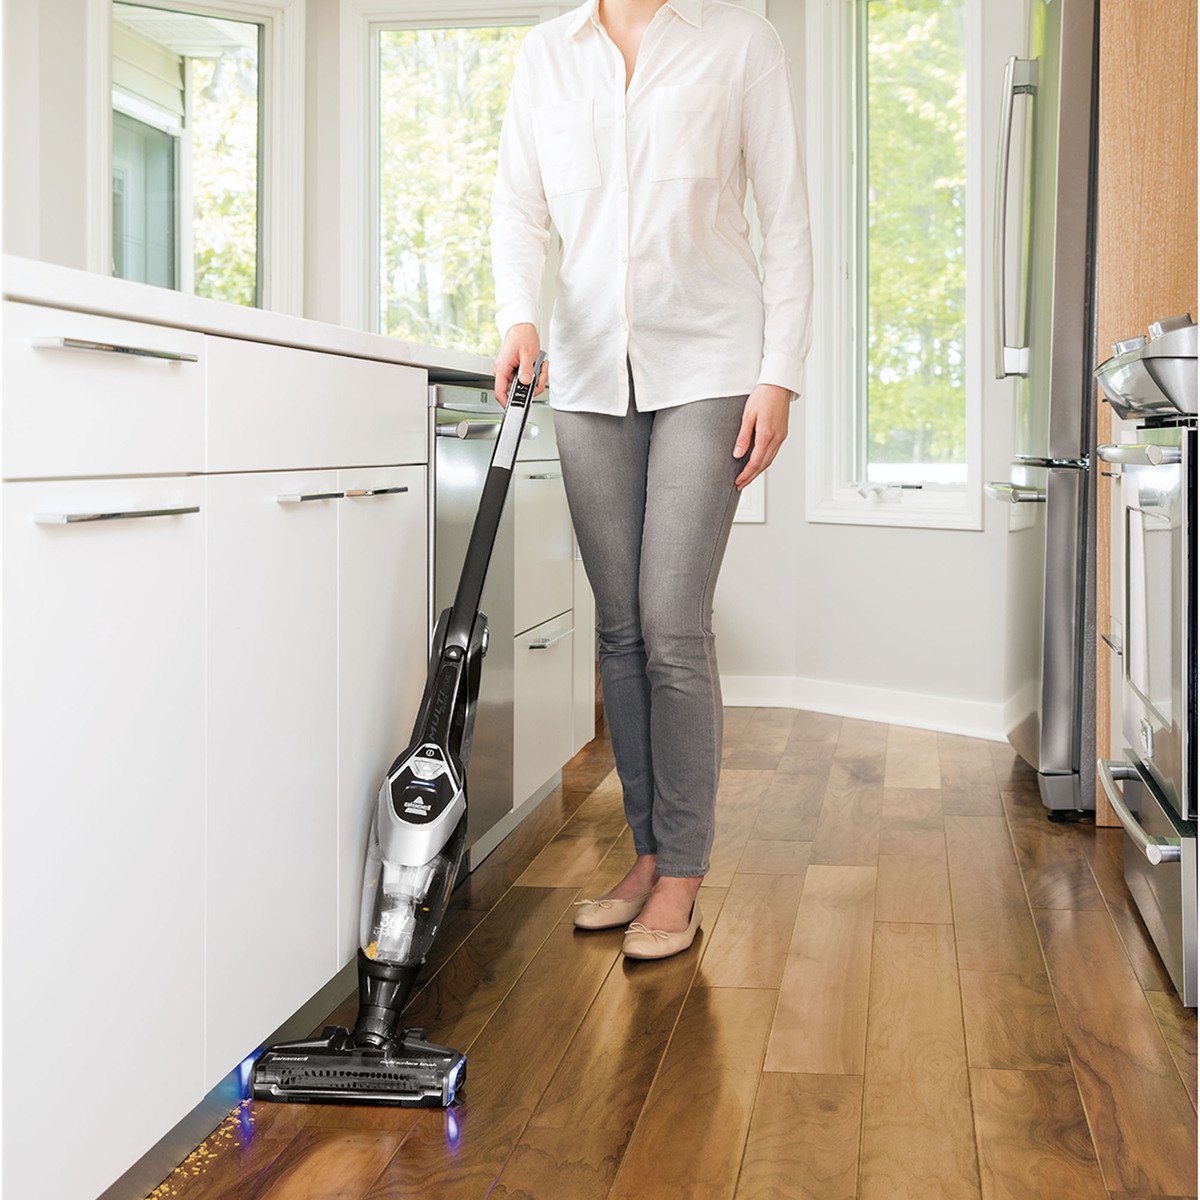 Bissell Multireach XL Cordless 3 in 1 Stick Bagless Vacuum Cleaner 2983E 0.6LTR